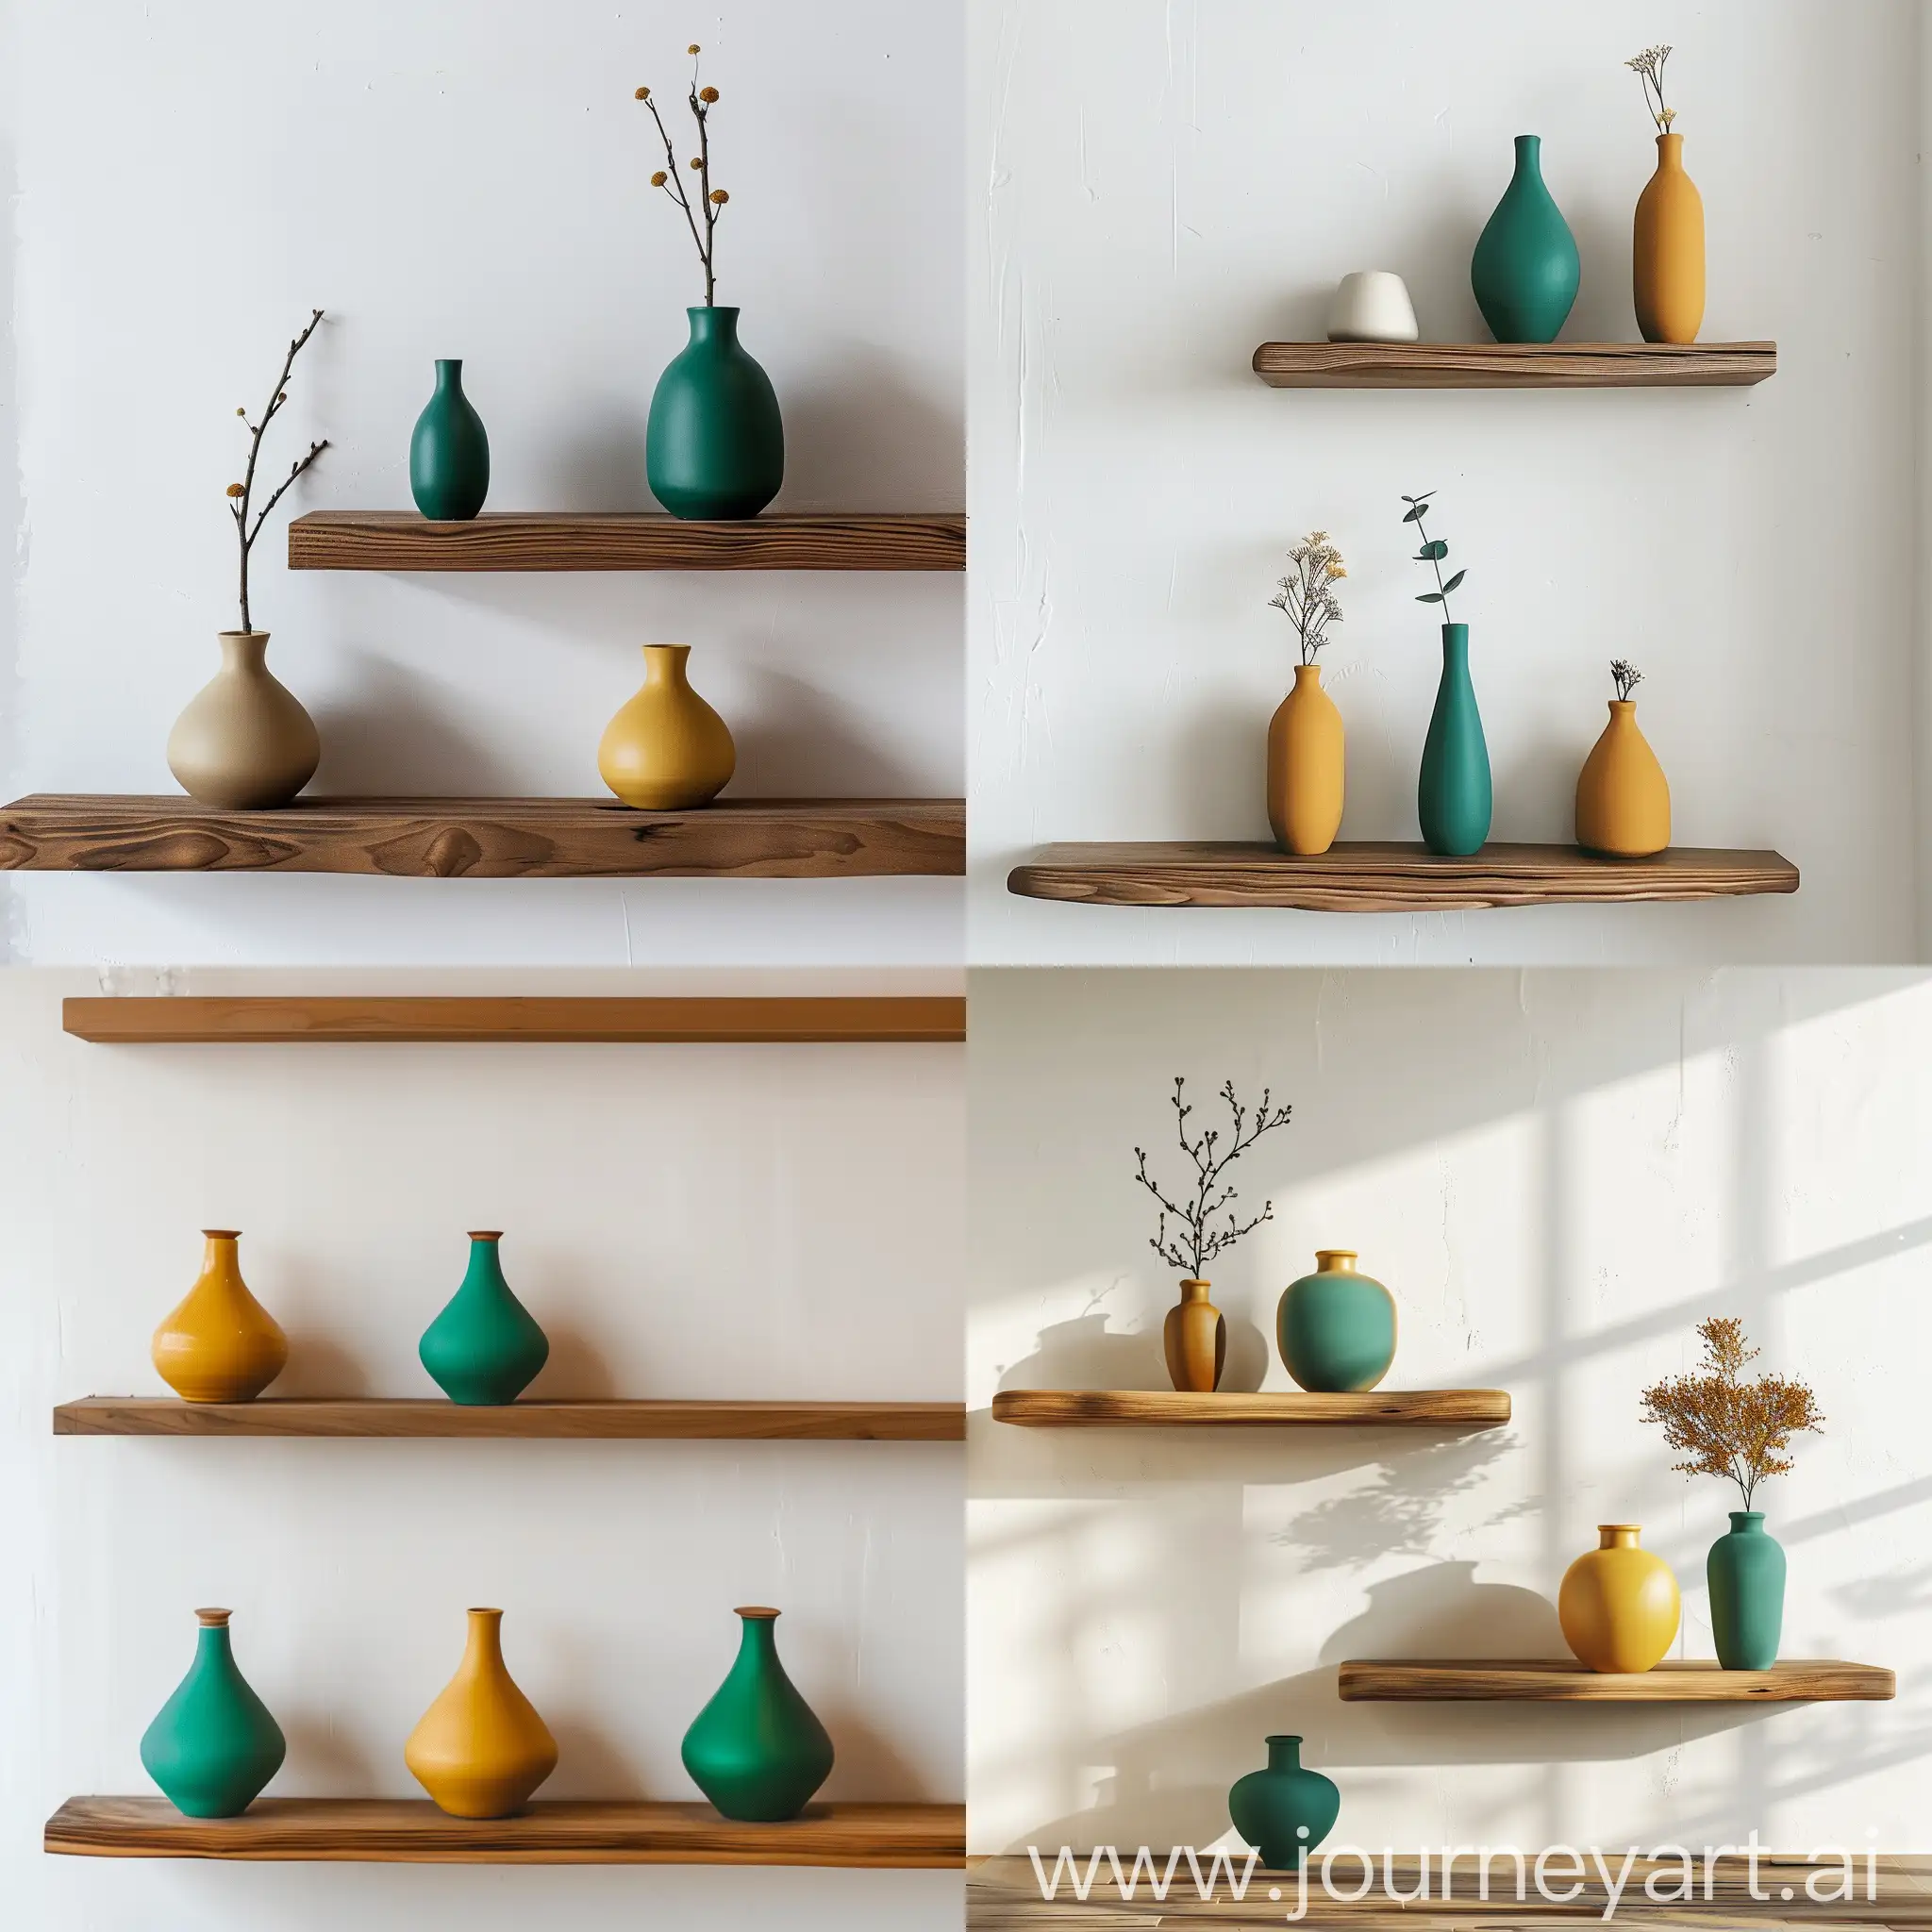 Minimalistic-Emerald-and-Mustard-Vases-on-Wooden-Shelves